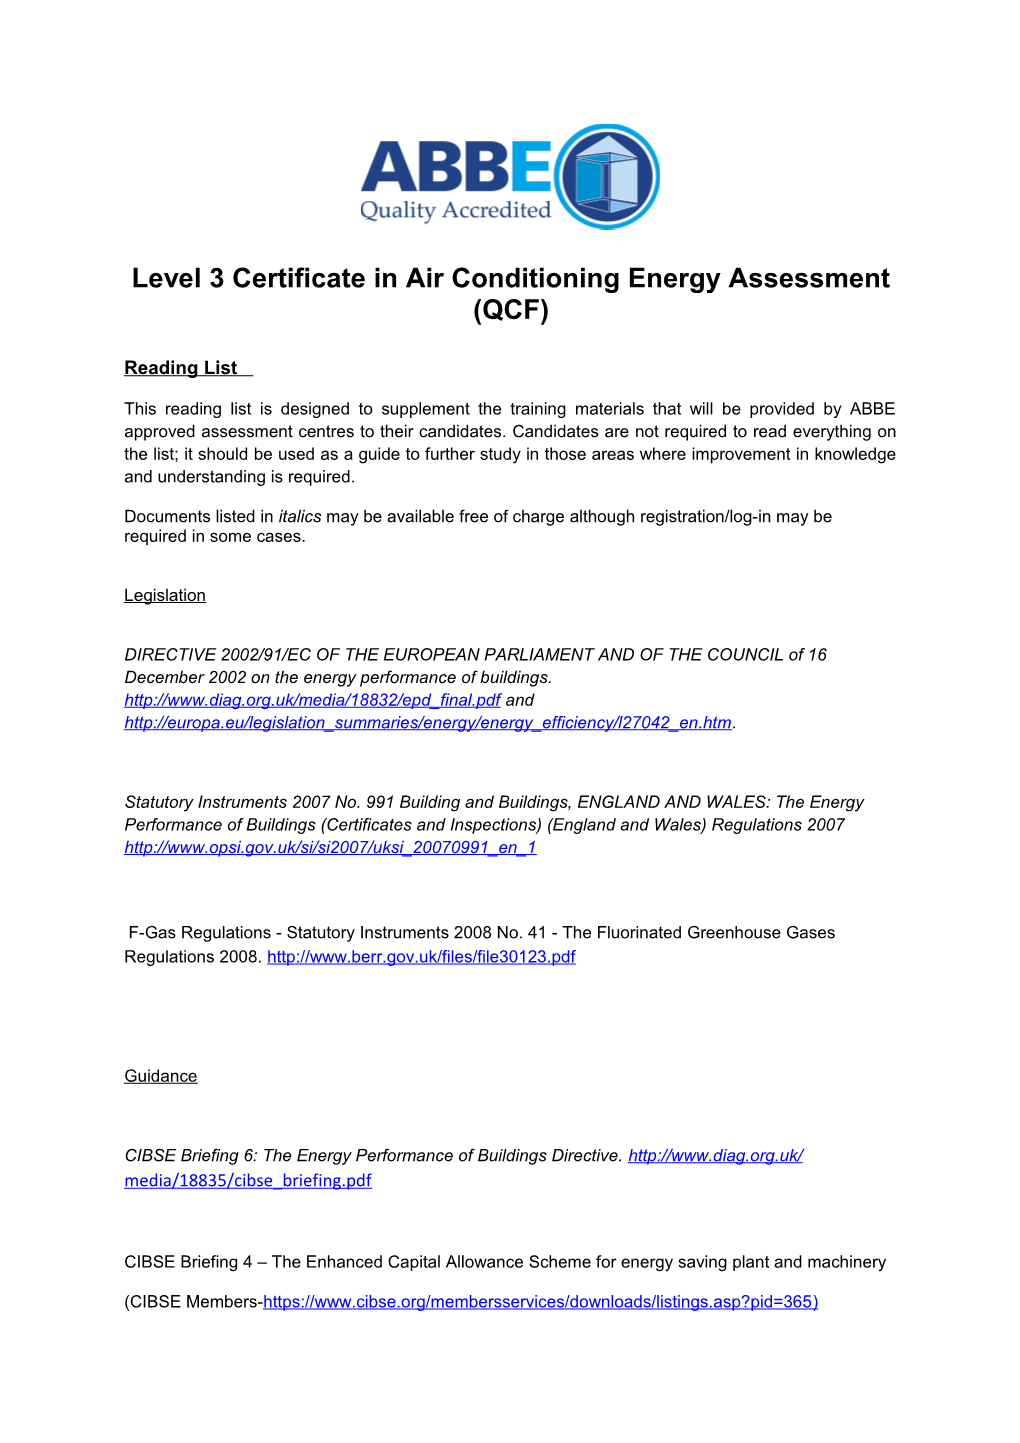 Level 3 Certificate in Air Conditioning Energy Assessment (QCF)